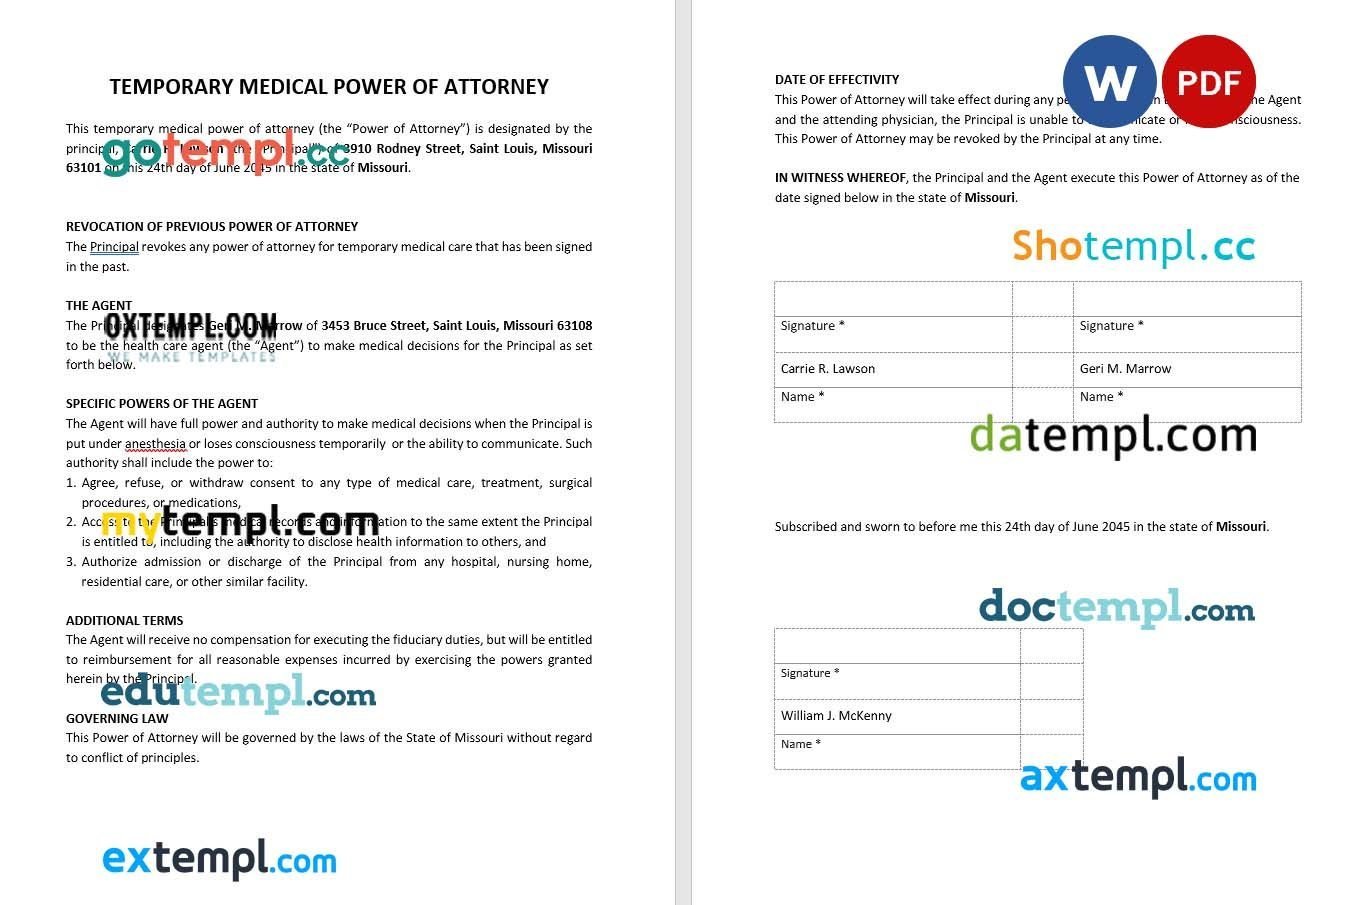 Temporary Medical Power of Attorney example, fully editable